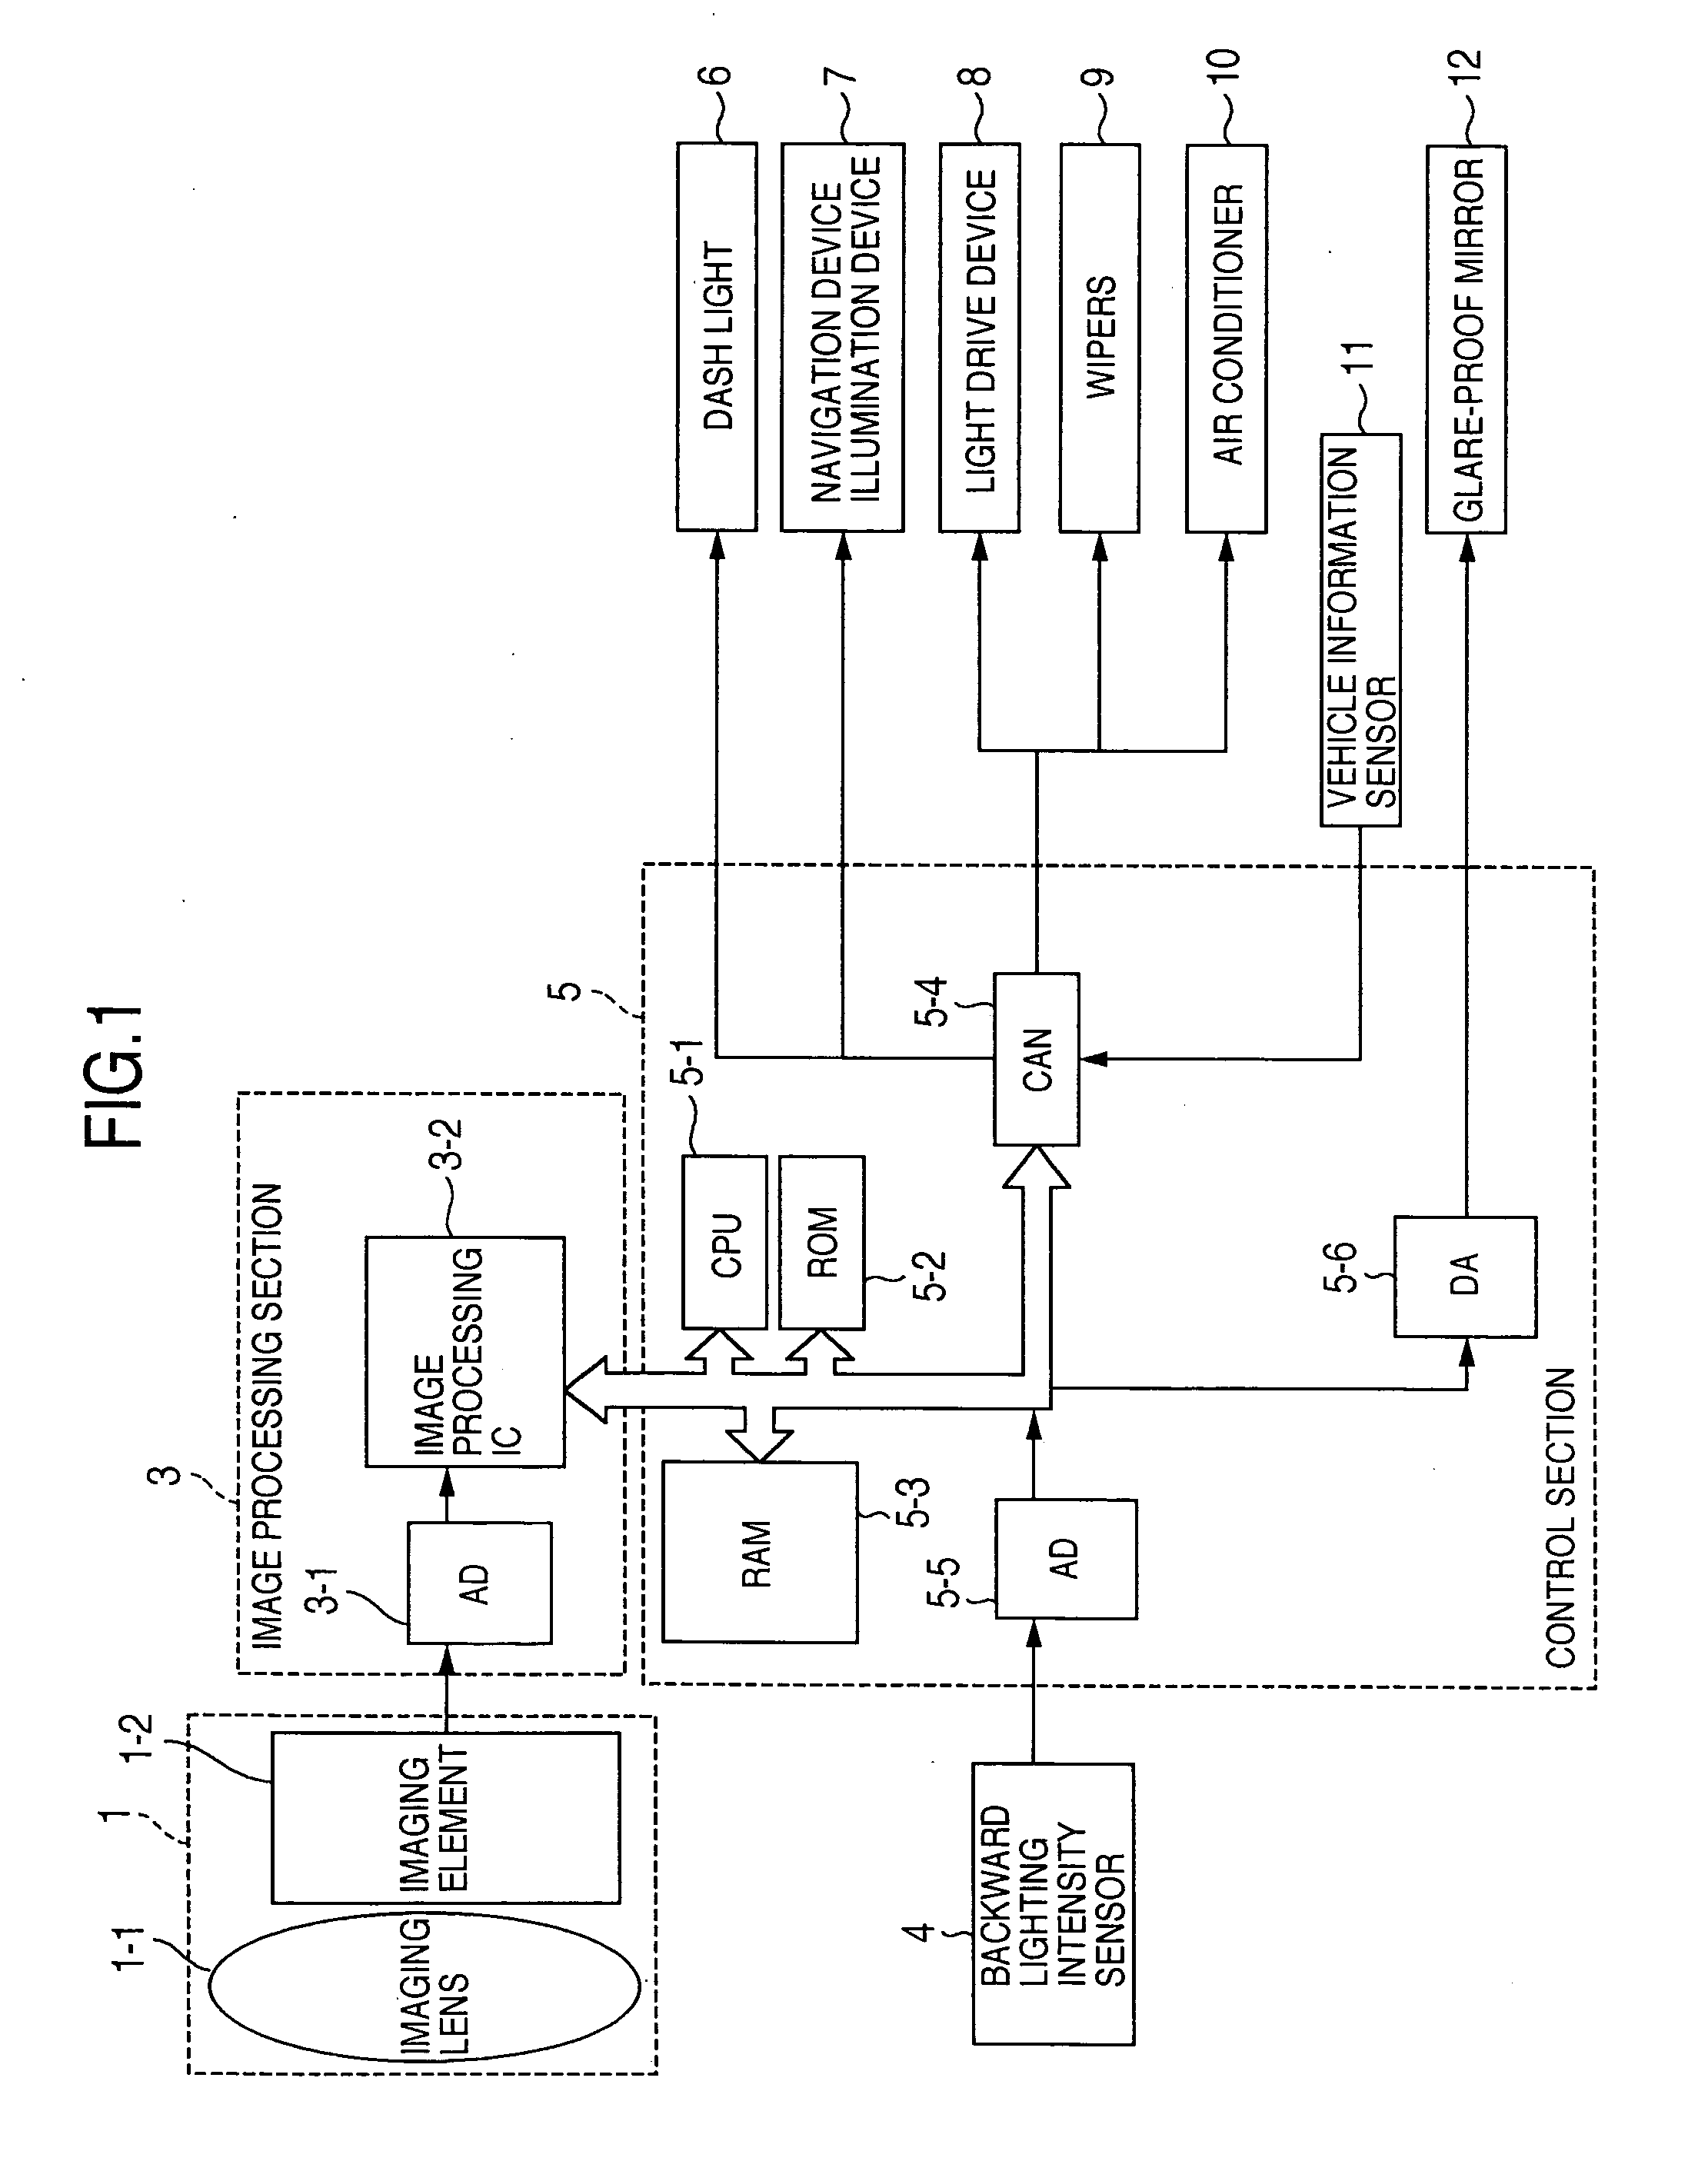 Apparatus for controlling auxiliary equipment of vehicle